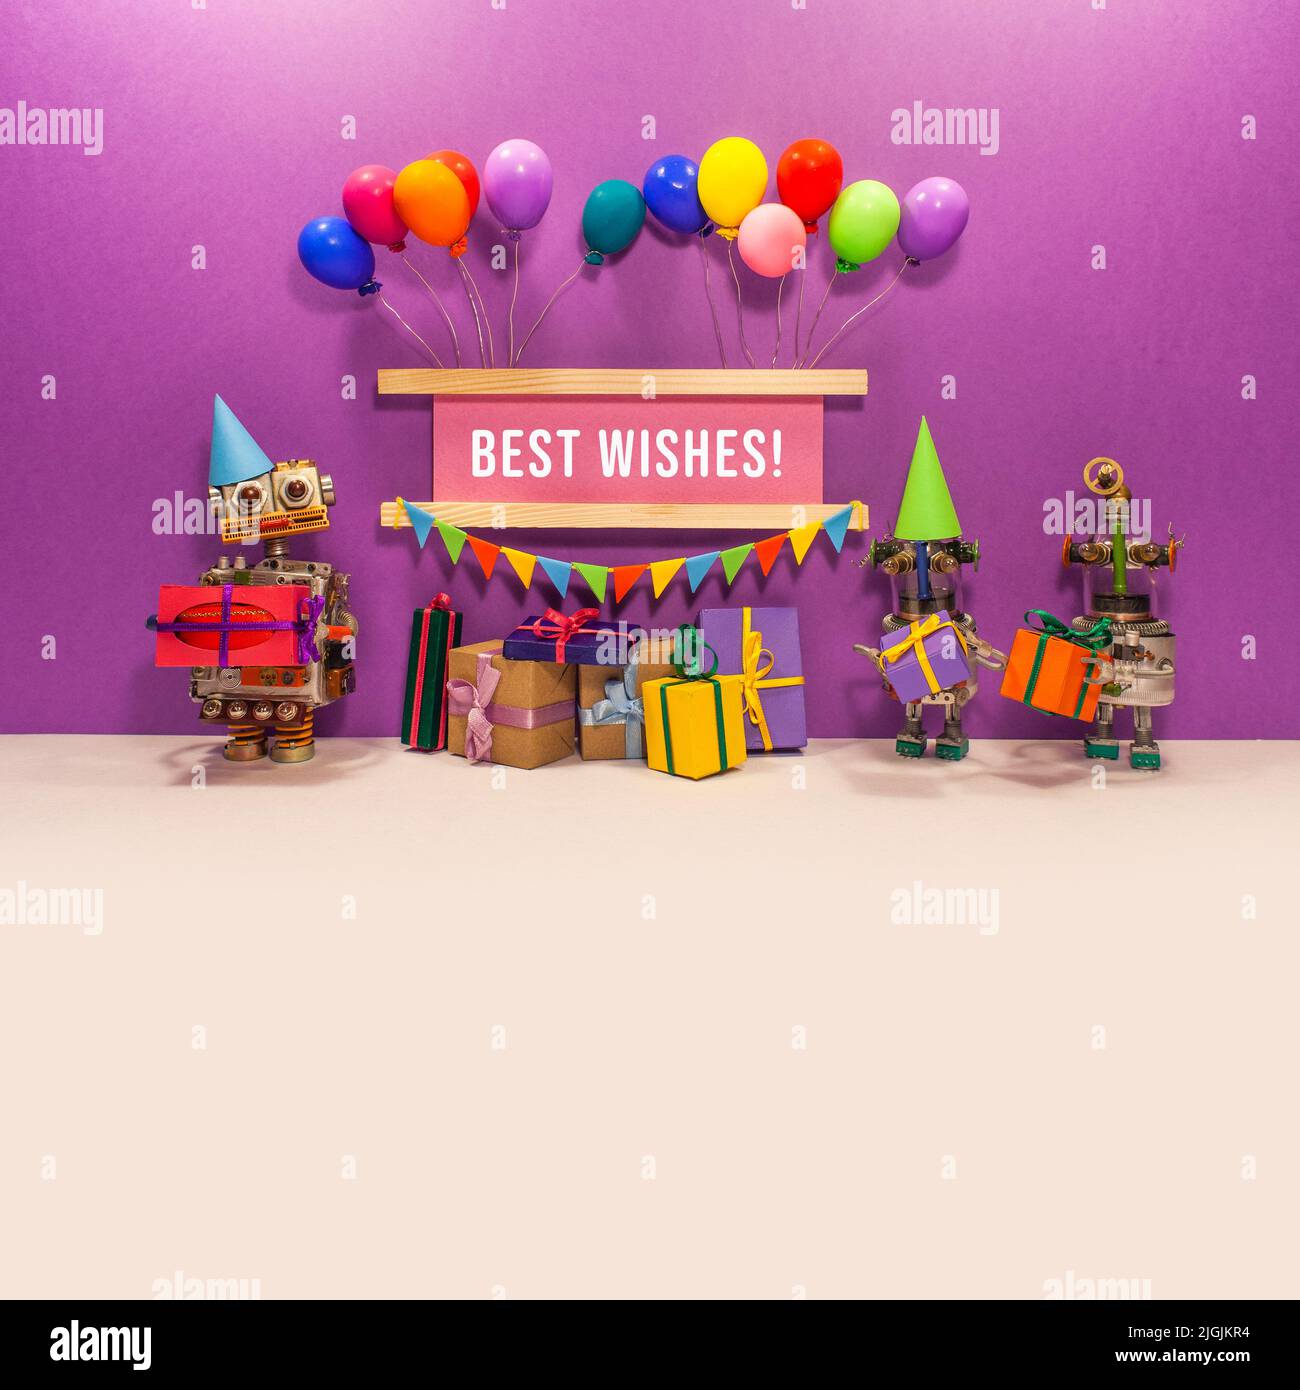 Best wishes card. Festive congratulation poster birthday, anniversary or any holiday. Robots with gifts, boxes. Garland of flags, balloons. copy space Stock Photo